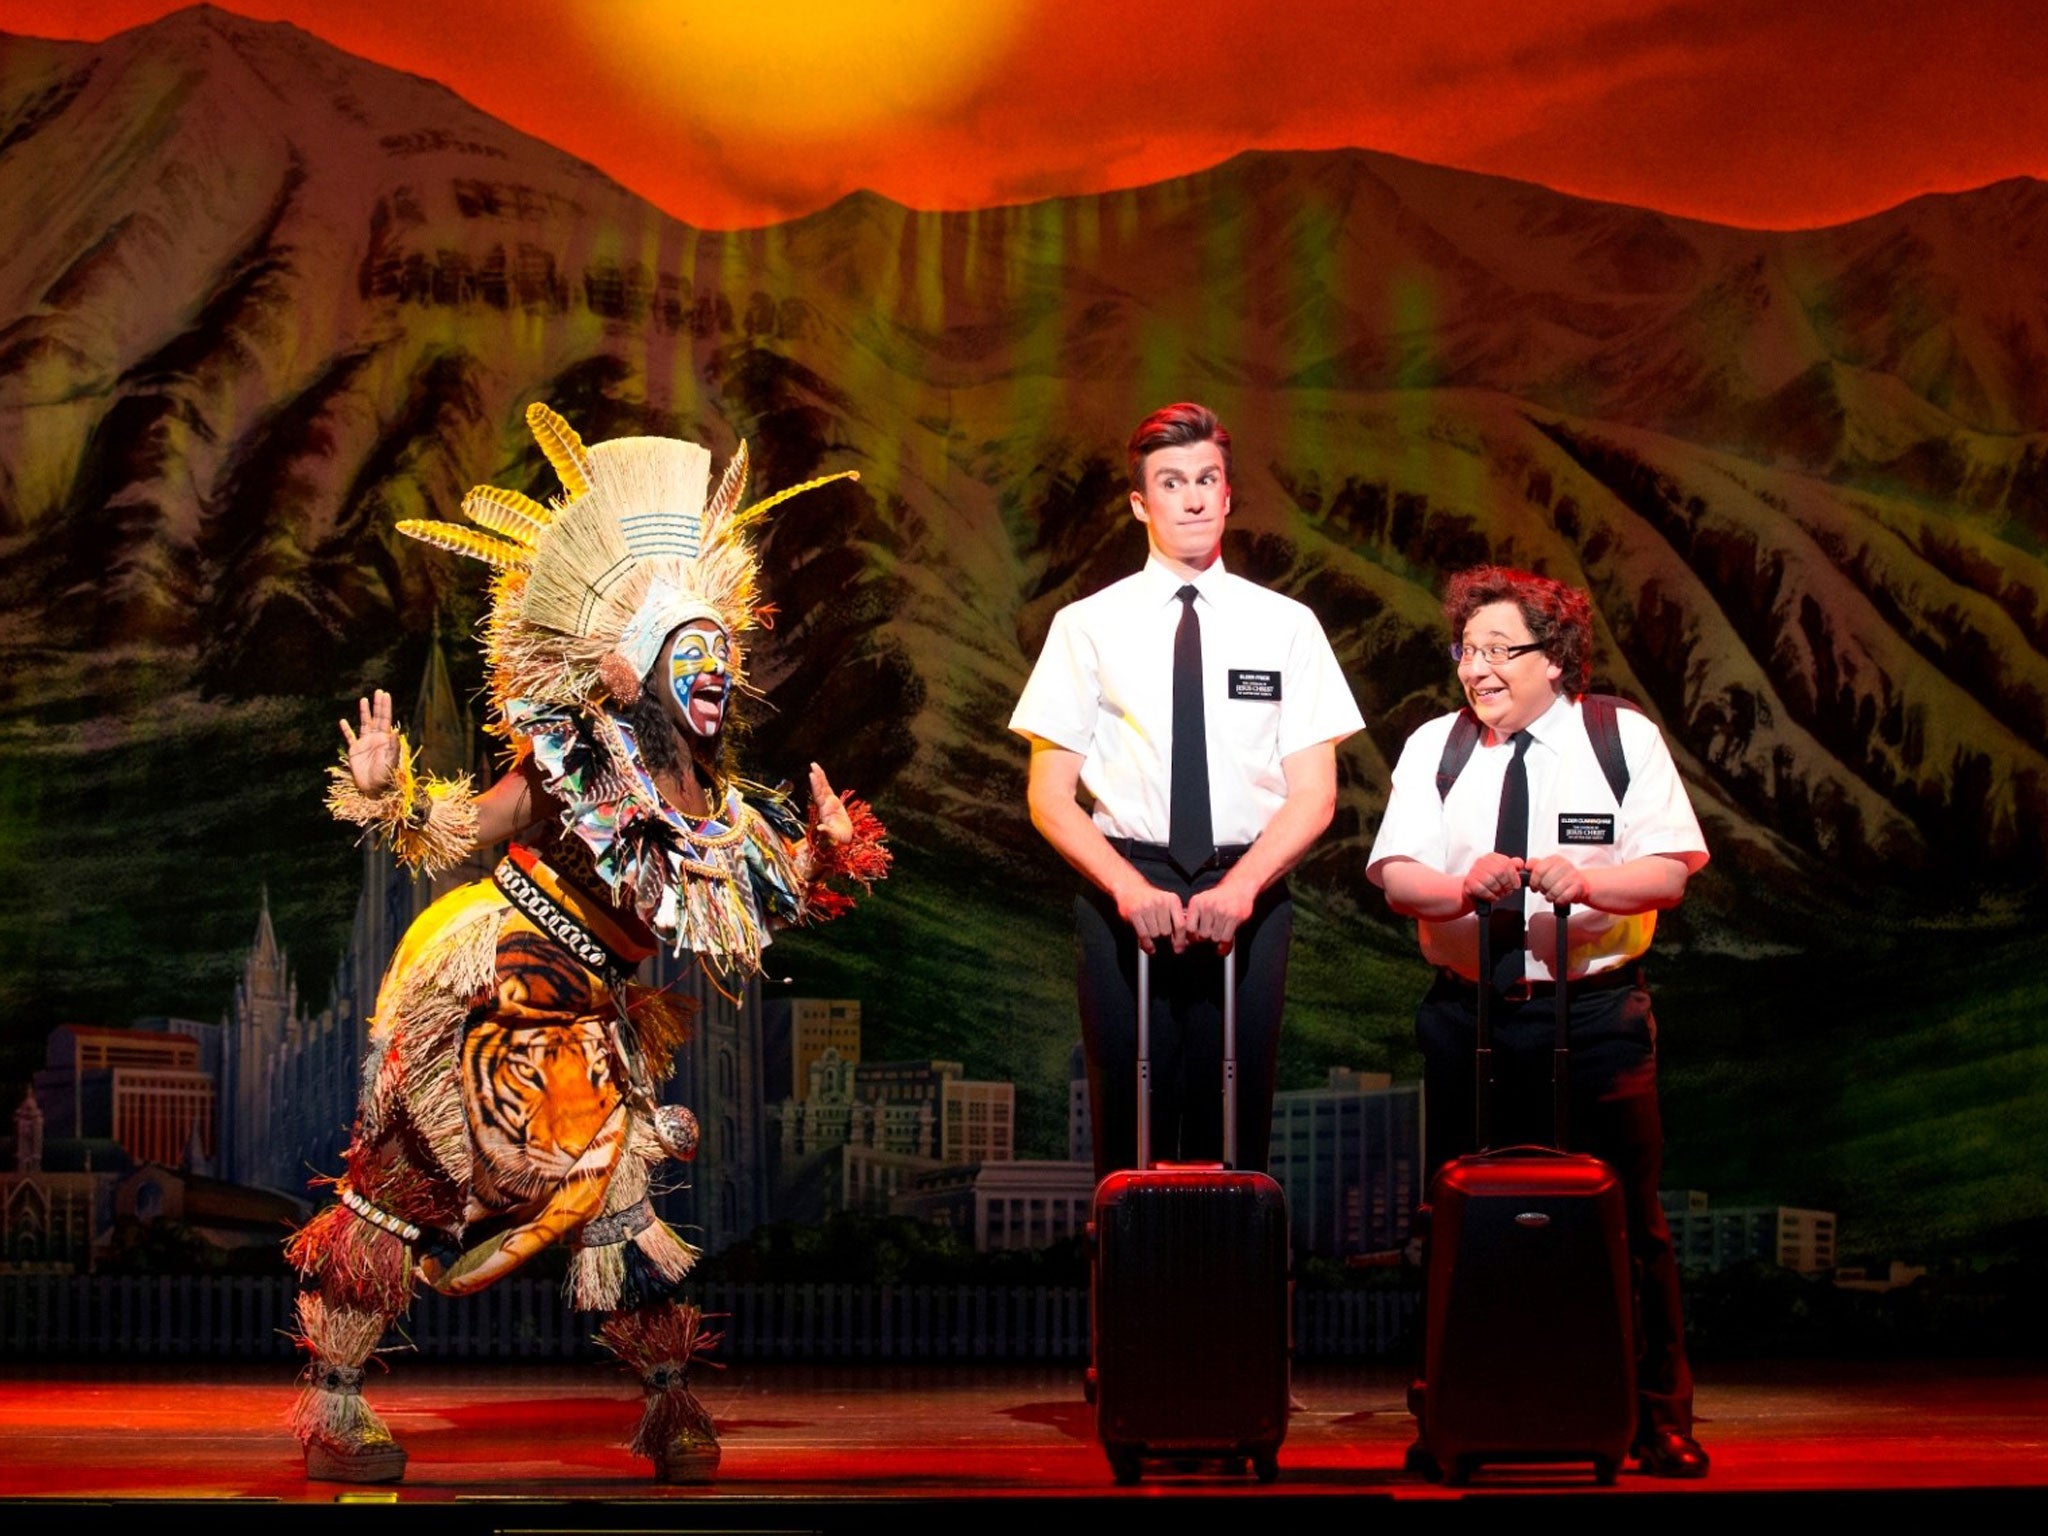 Bible bashing: Gavin Creel and Jared Gertner try to spread God’s word in The Book of Mormon